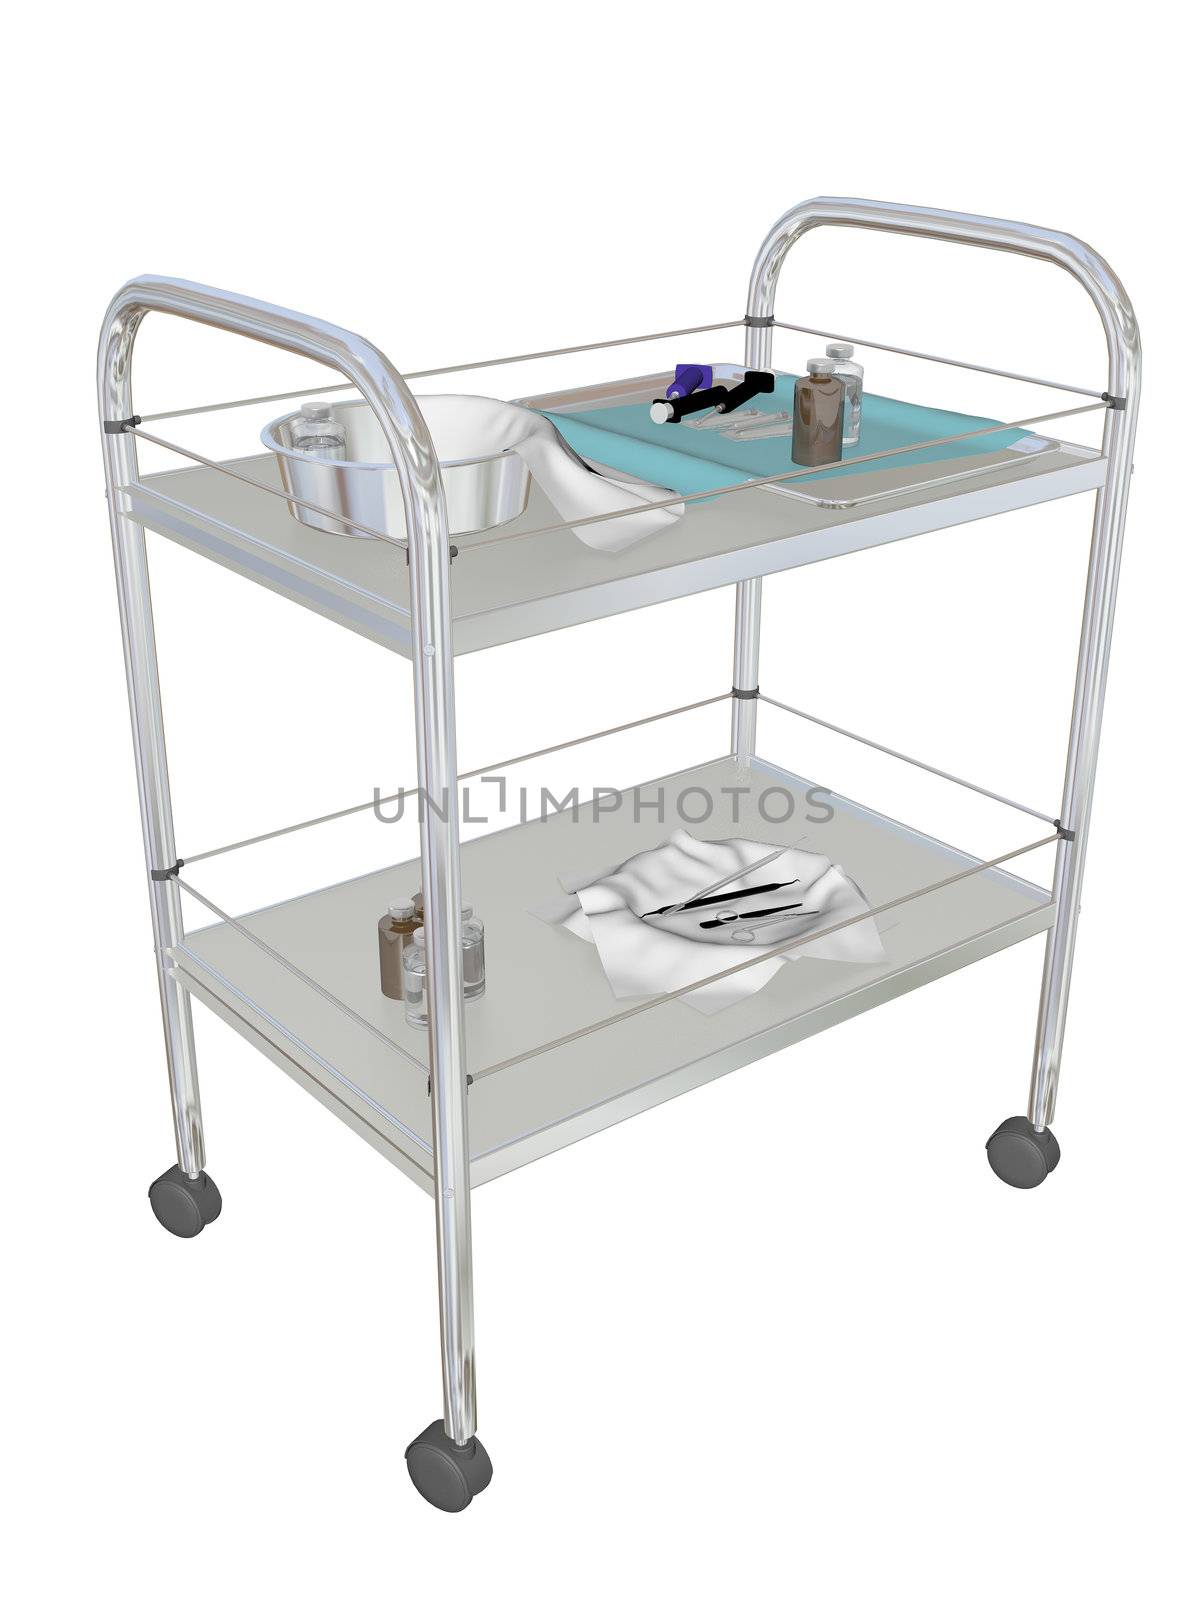 Mobile medical utility cart, 3D illustration, isolated against a white background.